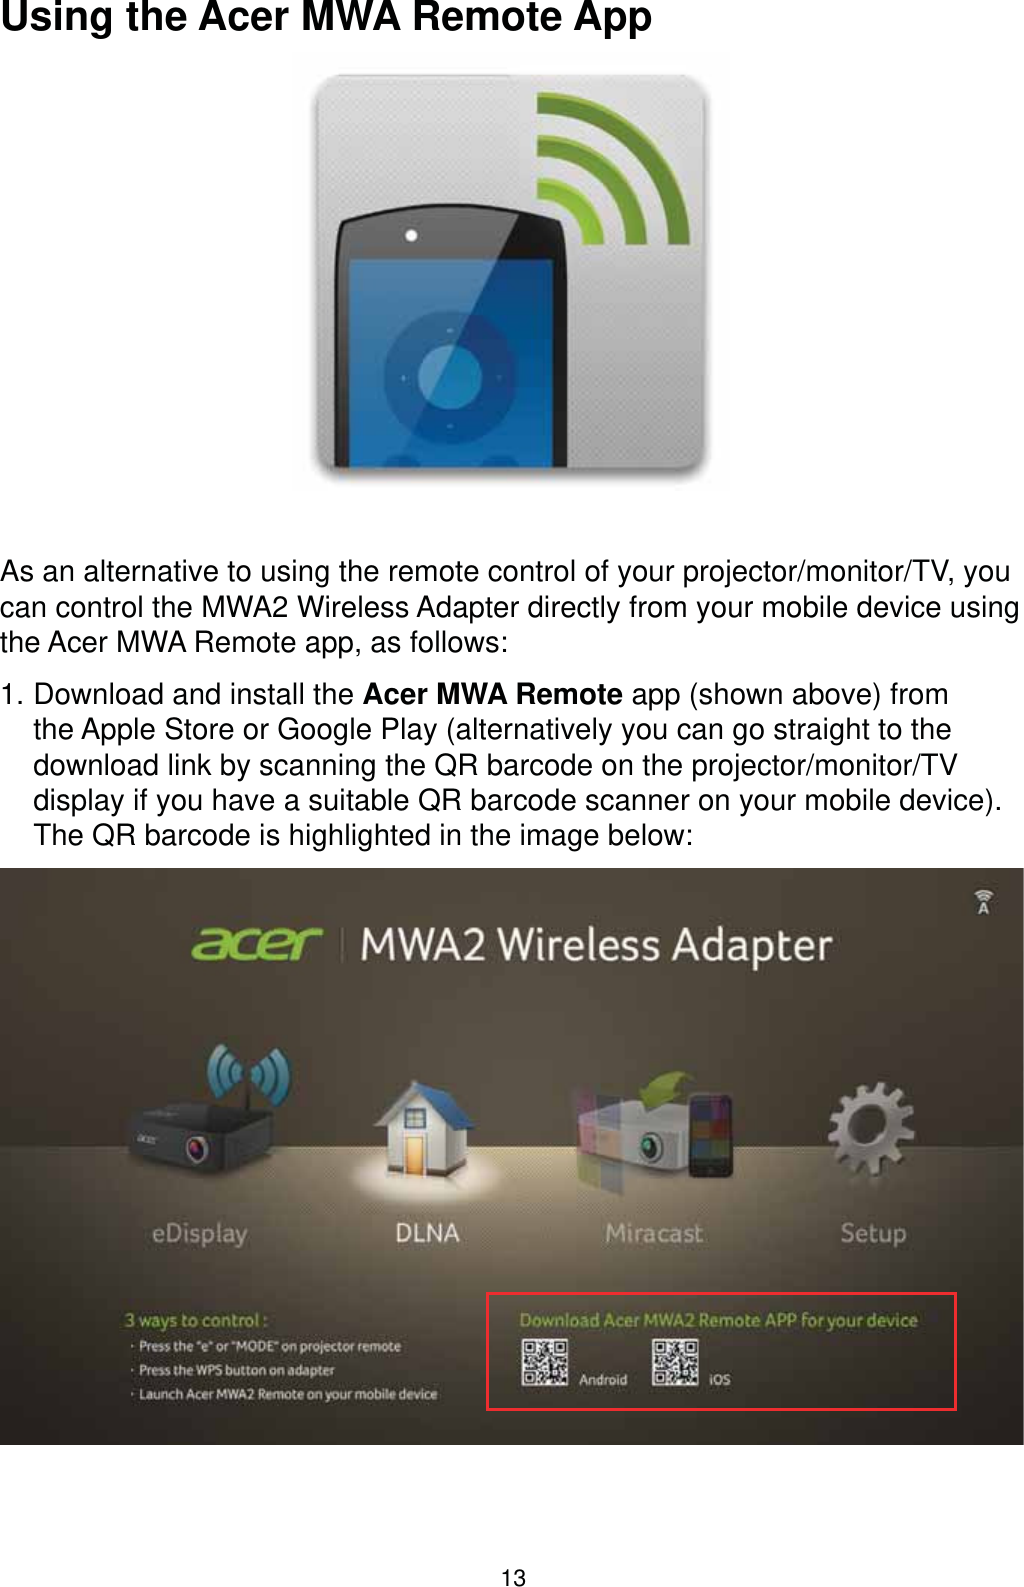 13Using the Acer MWA Remote AppAs an alternative to using the remote control of your projector/monitor/TV, you can control the MWA2 Wireless Adapter directly from your mobile device using the Acer MWA Remote app, as follows:  1. Download and install the Acer MWA Remote app (shown above) from the Apple Store or Google Play (alternatively you can go straight to the download link by scanning the QR barcode on the projector/monitor/TV display if you have a suitable QR barcode scanner on your mobile device). The QR barcode is highlighted in the image below: